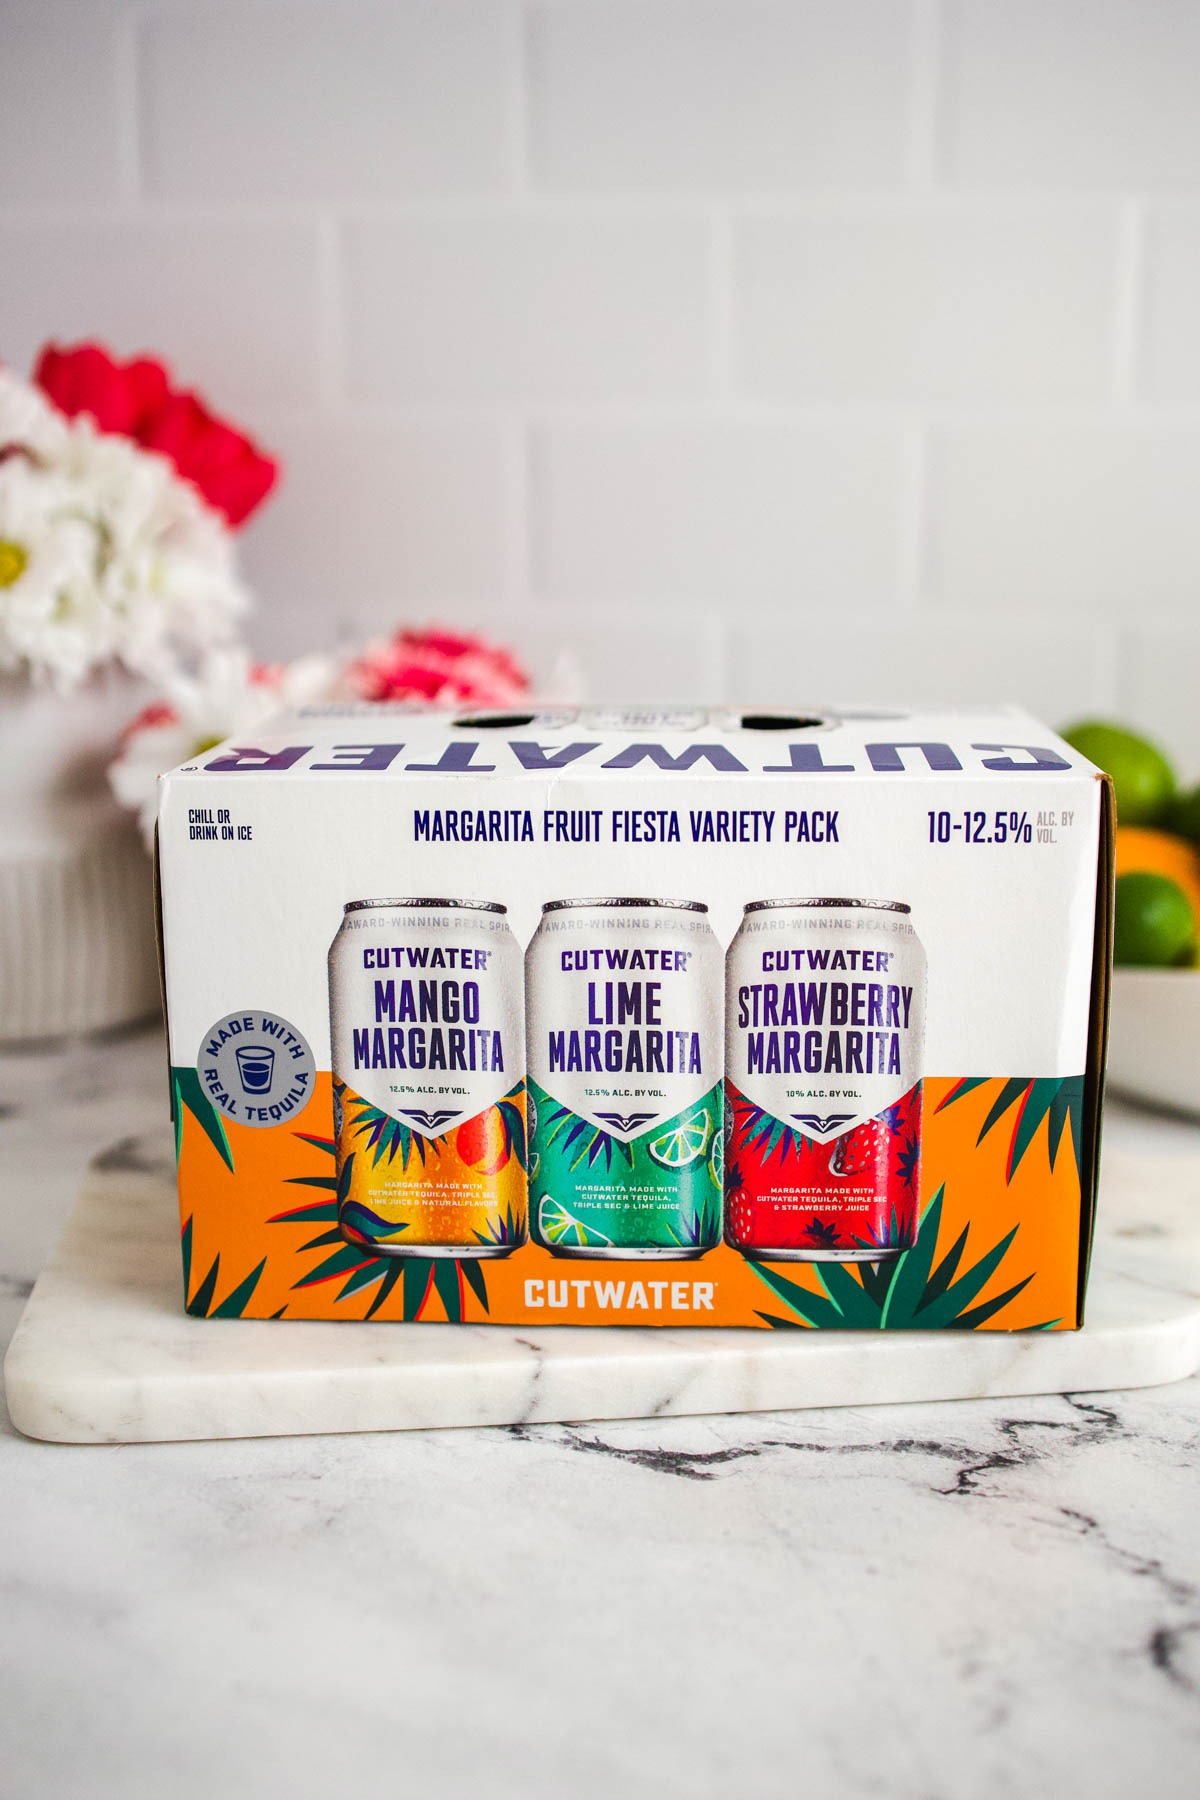 A boxed variety pack of Cutwater canned margaritas.